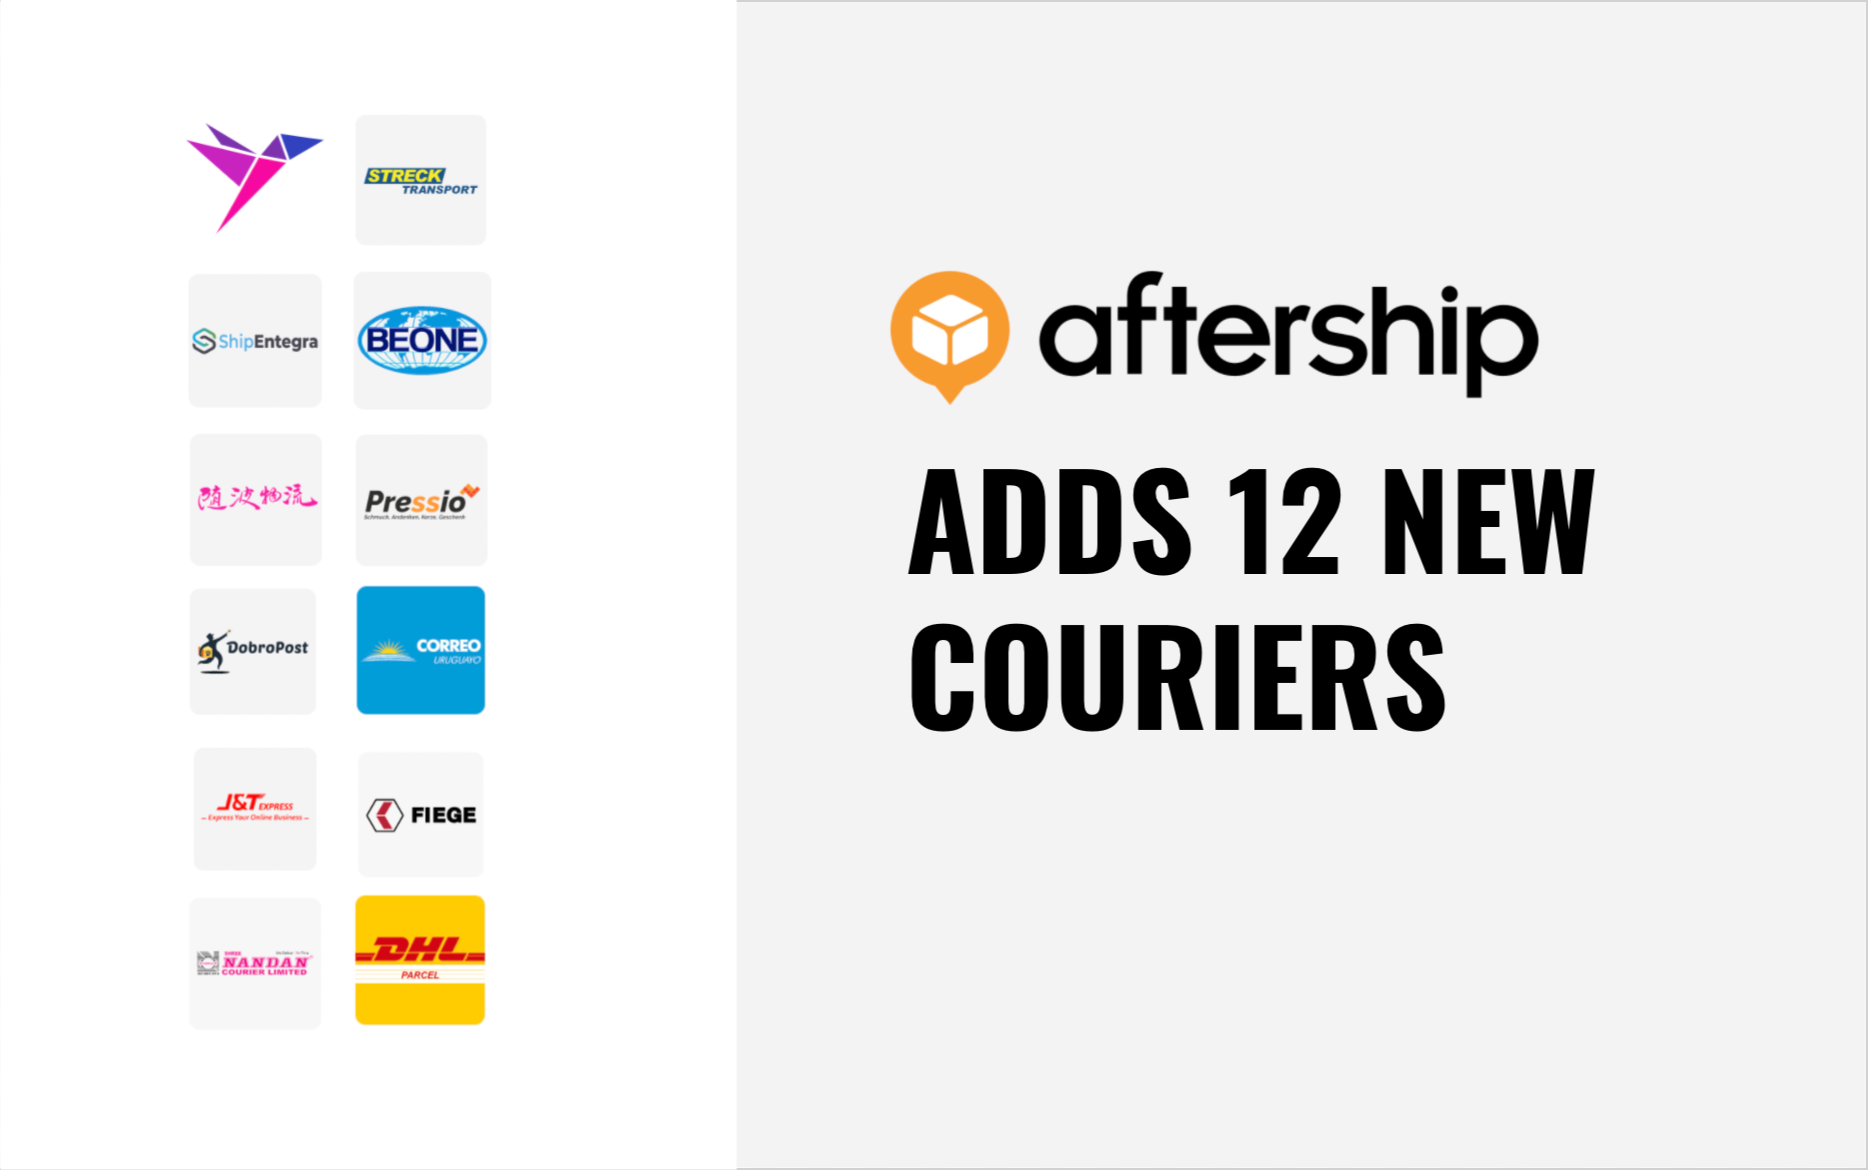 AfterShip adds 12 new couriers this week (15th May 2021 to 30th May 2021)